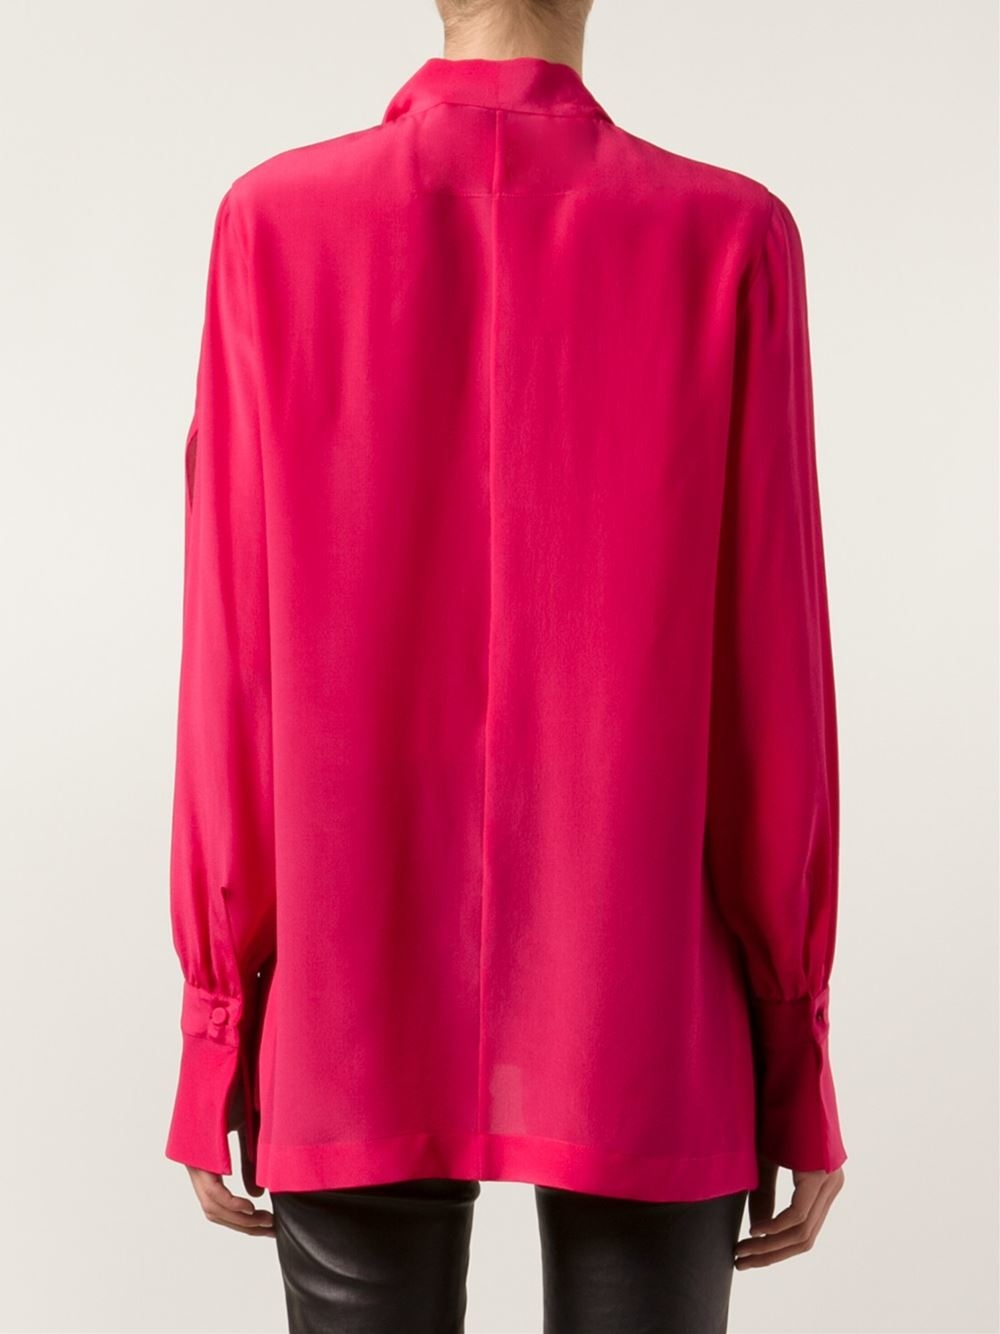 Givenchy Silk Chiffon Tie Neck Blouse in Purple | Lyst